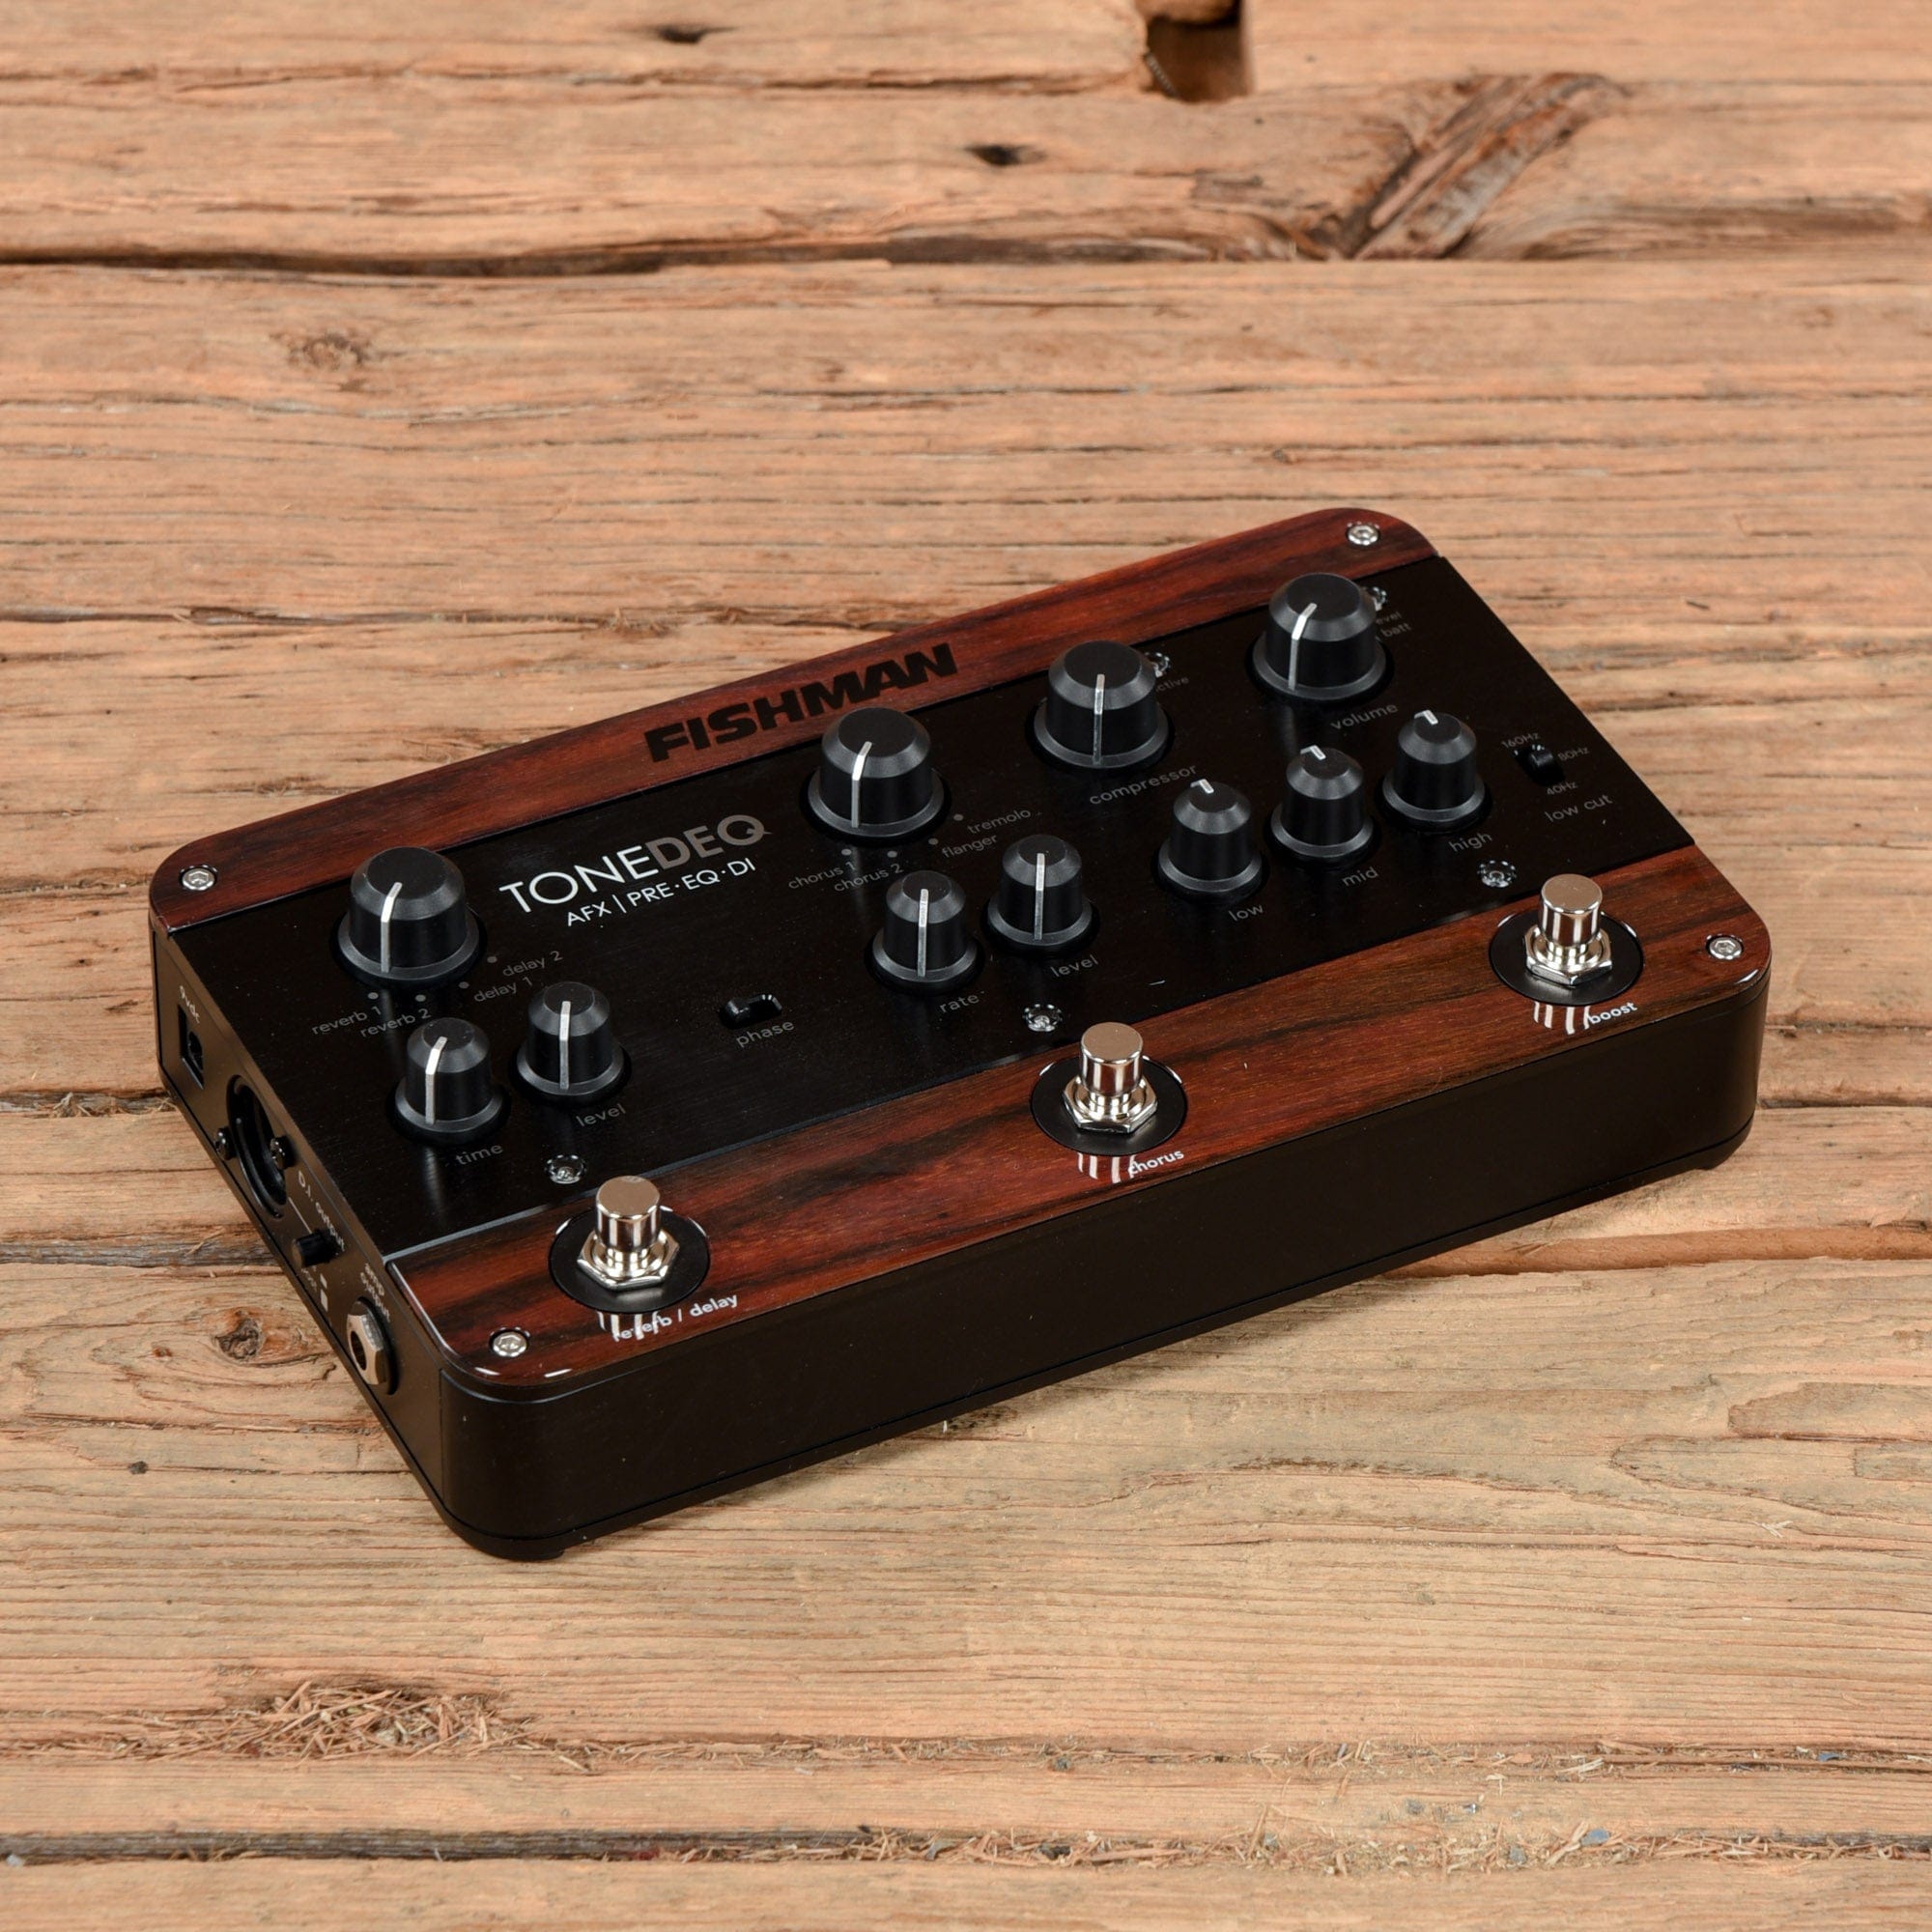 Fishman ToneDeq AFX Preamp, EQ and DI with Dual Effects – Chicago